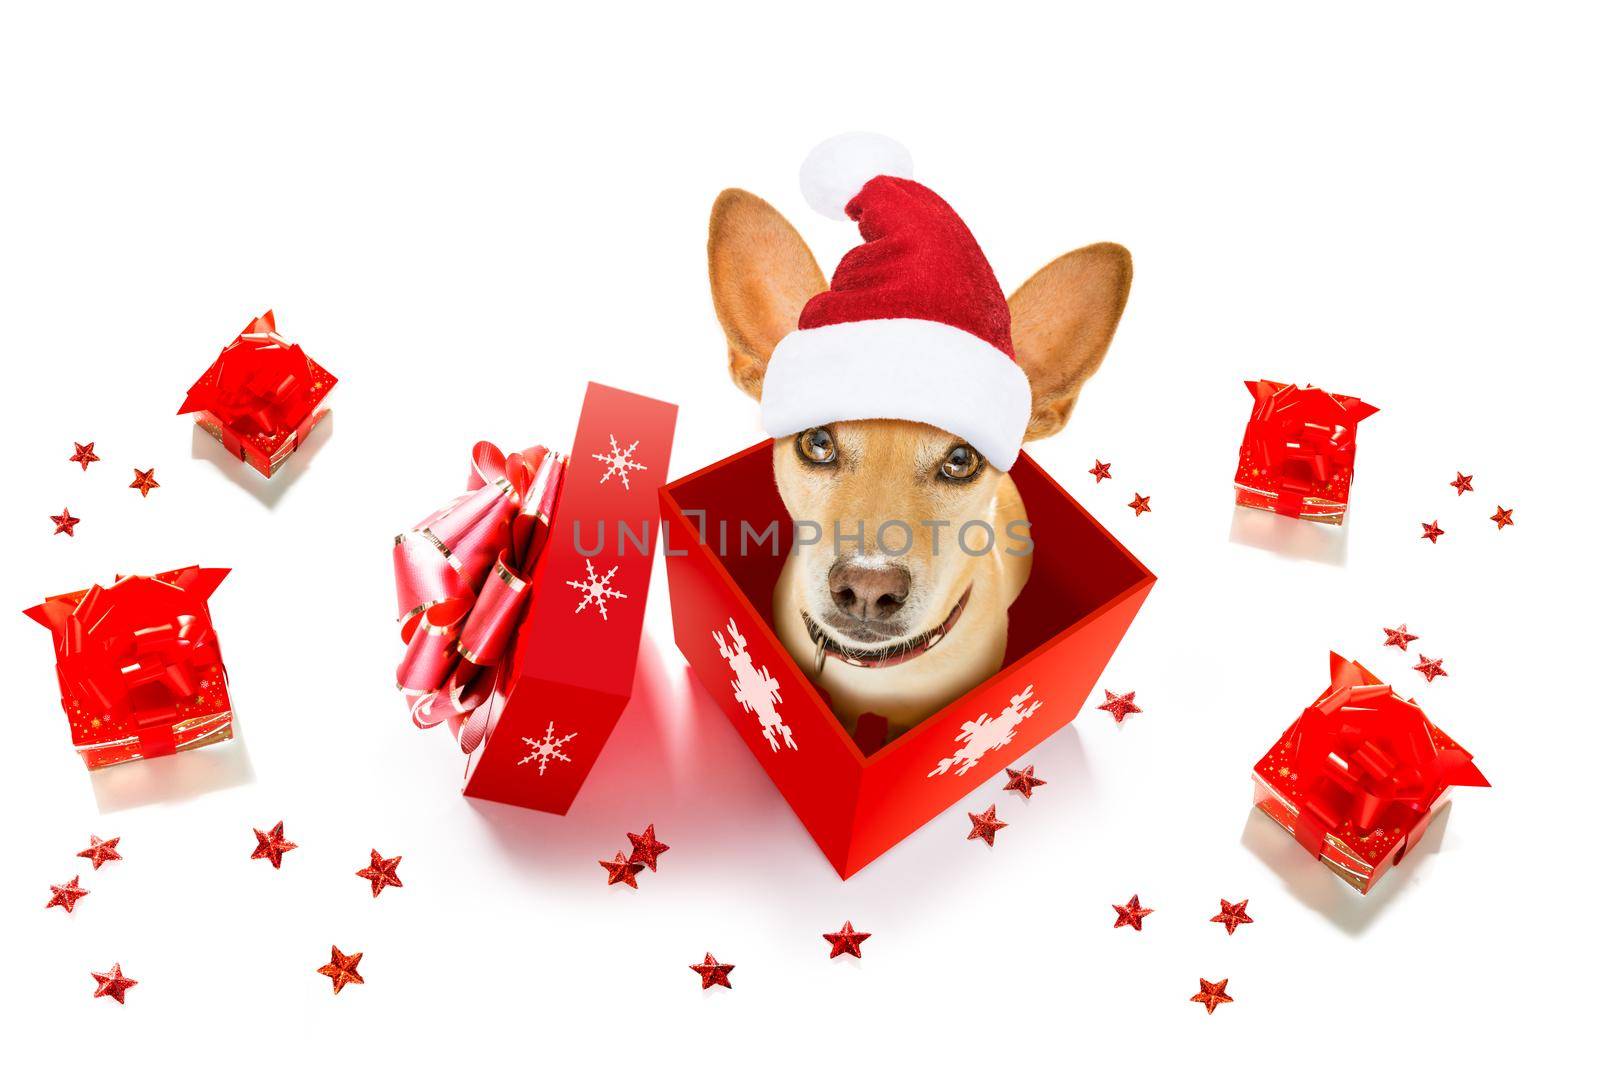 christmas santa claus chihuahua dog as a holiday season surprise out of a gift or present box  with red hat , isolated on white background with stars falling